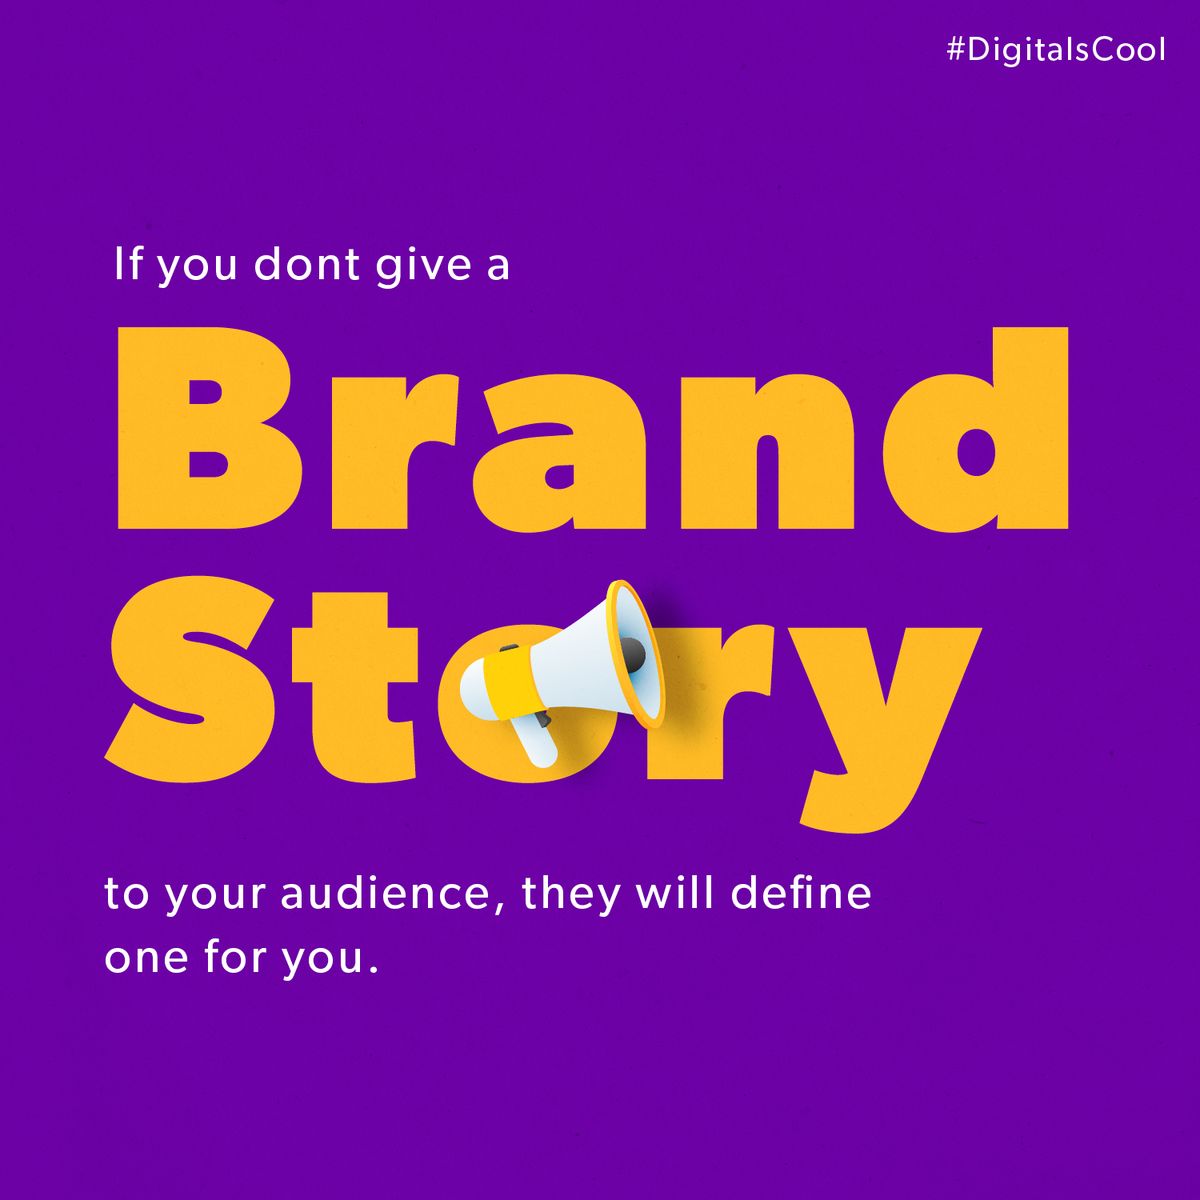 You need to craft your brand story in your market. This is how your customers will perceive you. For more tips on brand building, call us today. #digitalmarketingagency #digitalmarketingcourse #brandbuildingtips #skillzlearn #digitalscool